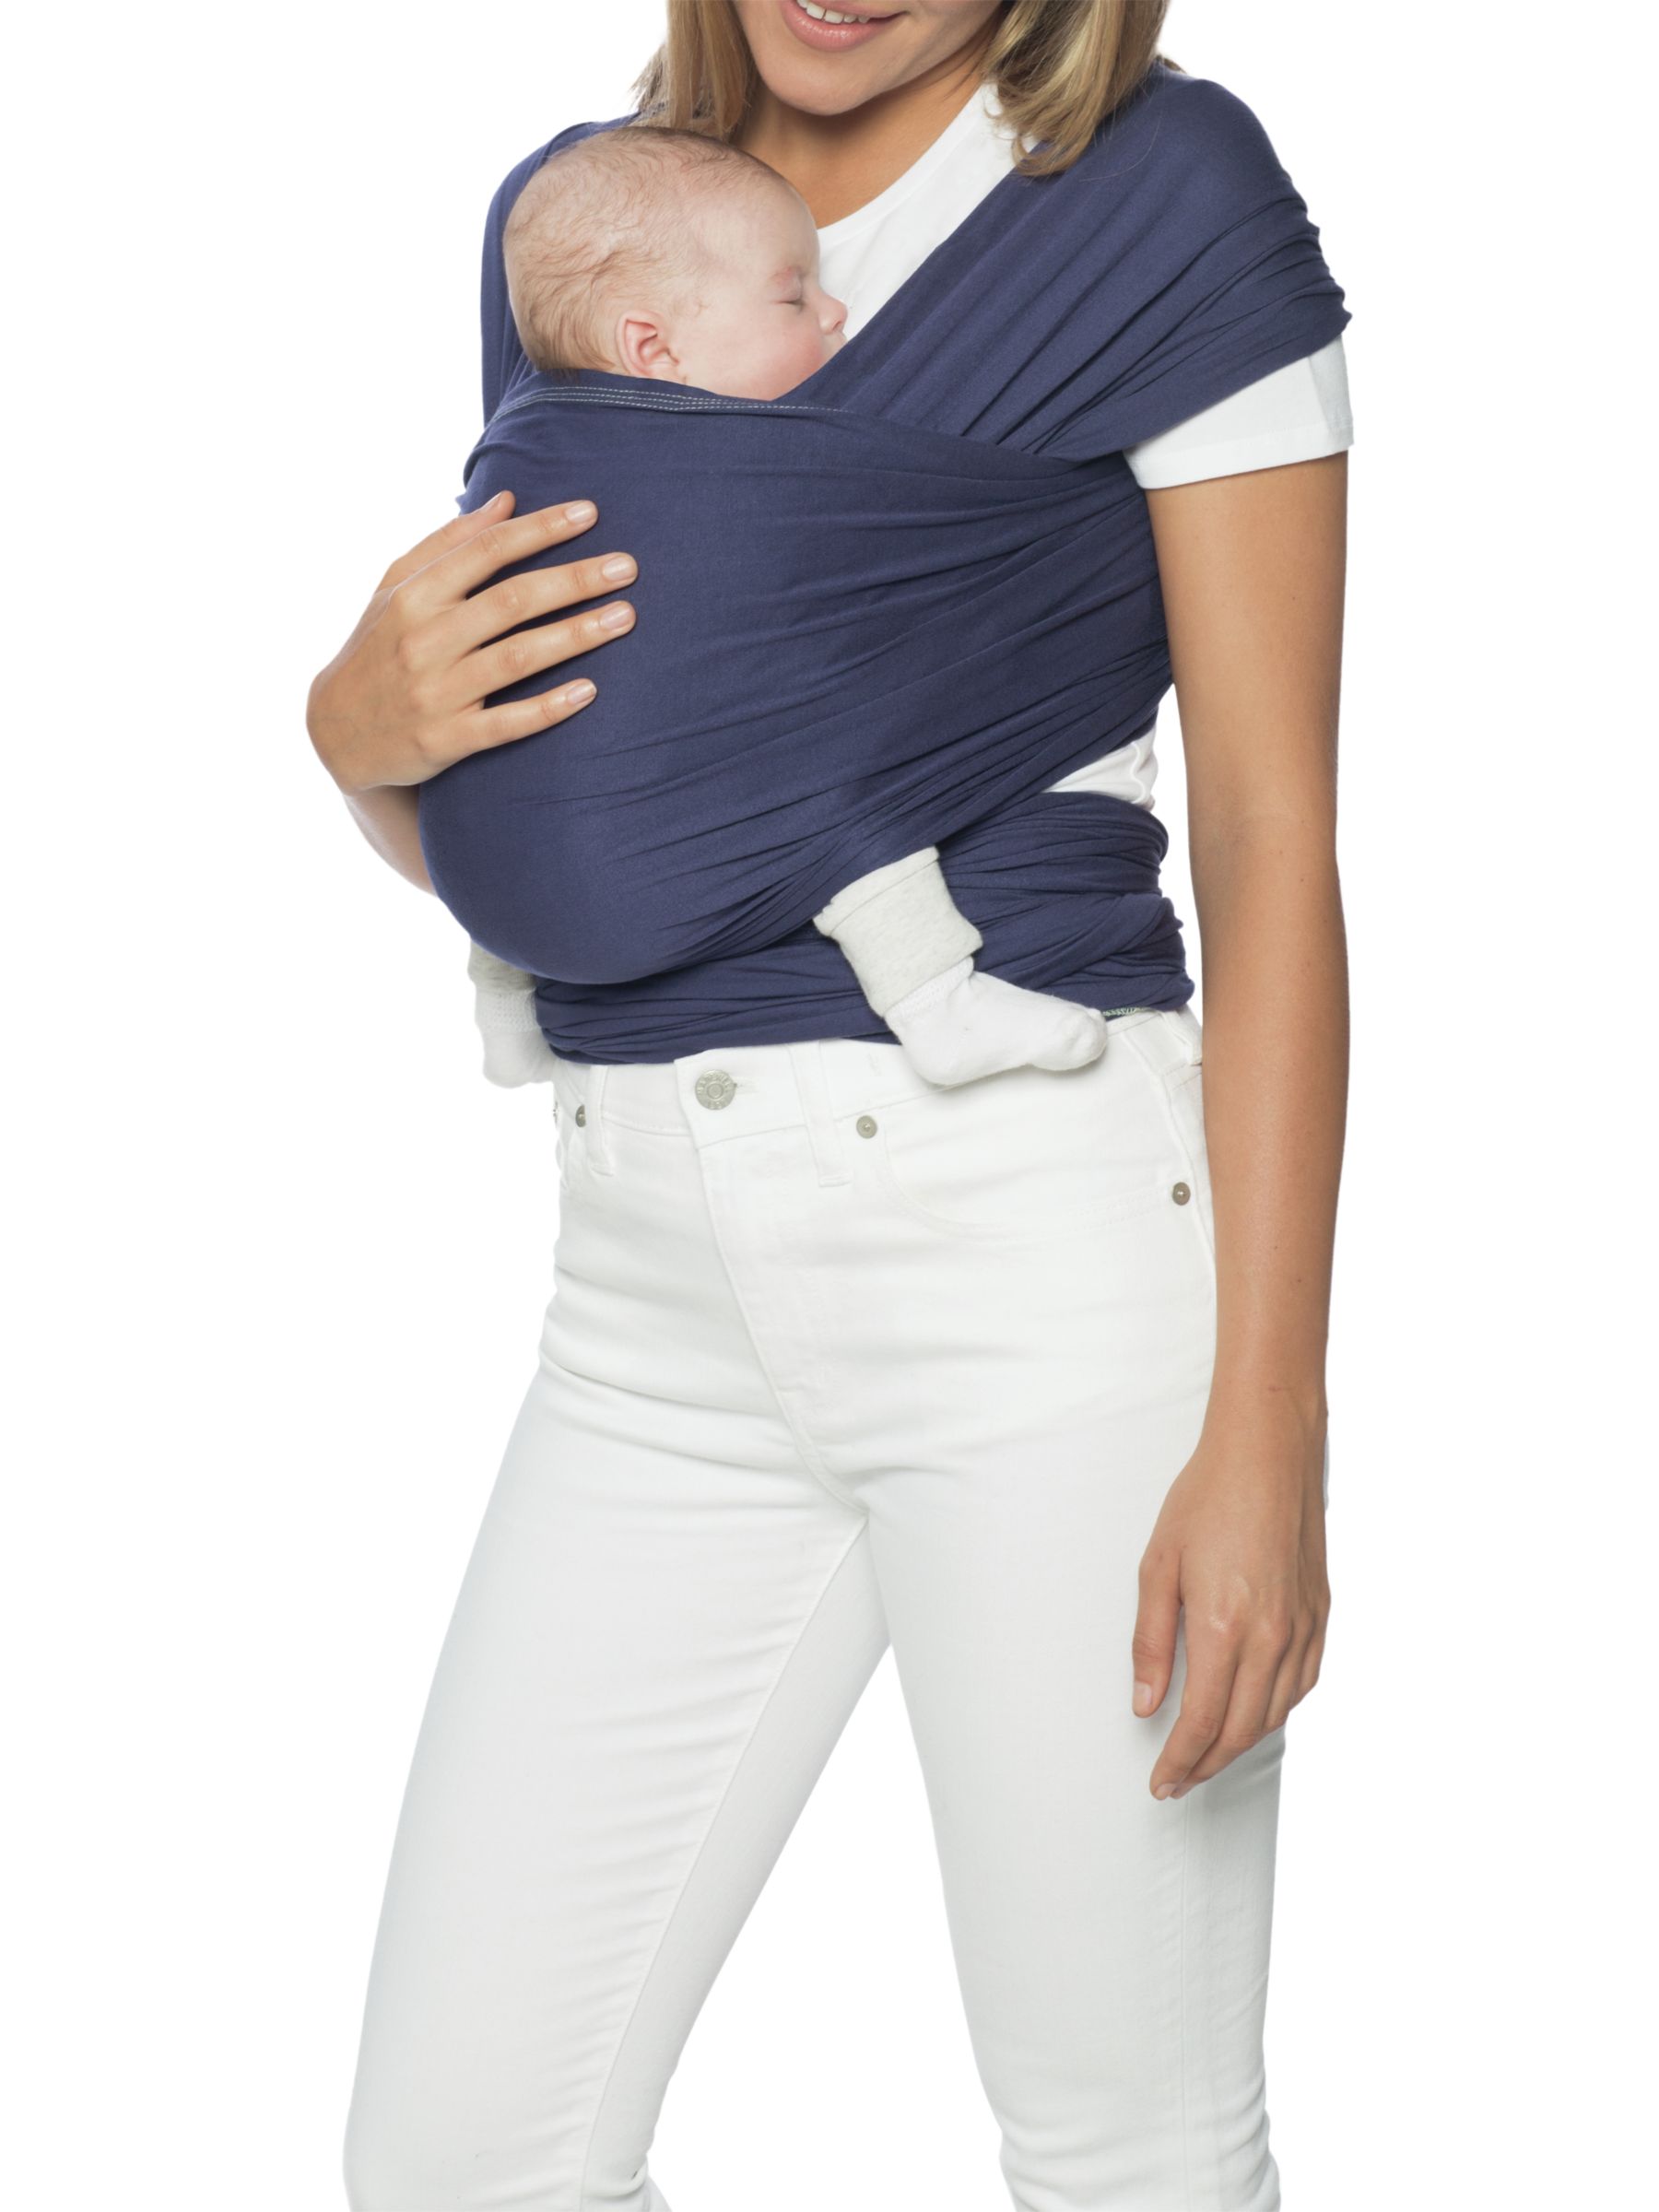 Image of Ergobaby Aura Baby Carrier Wrap